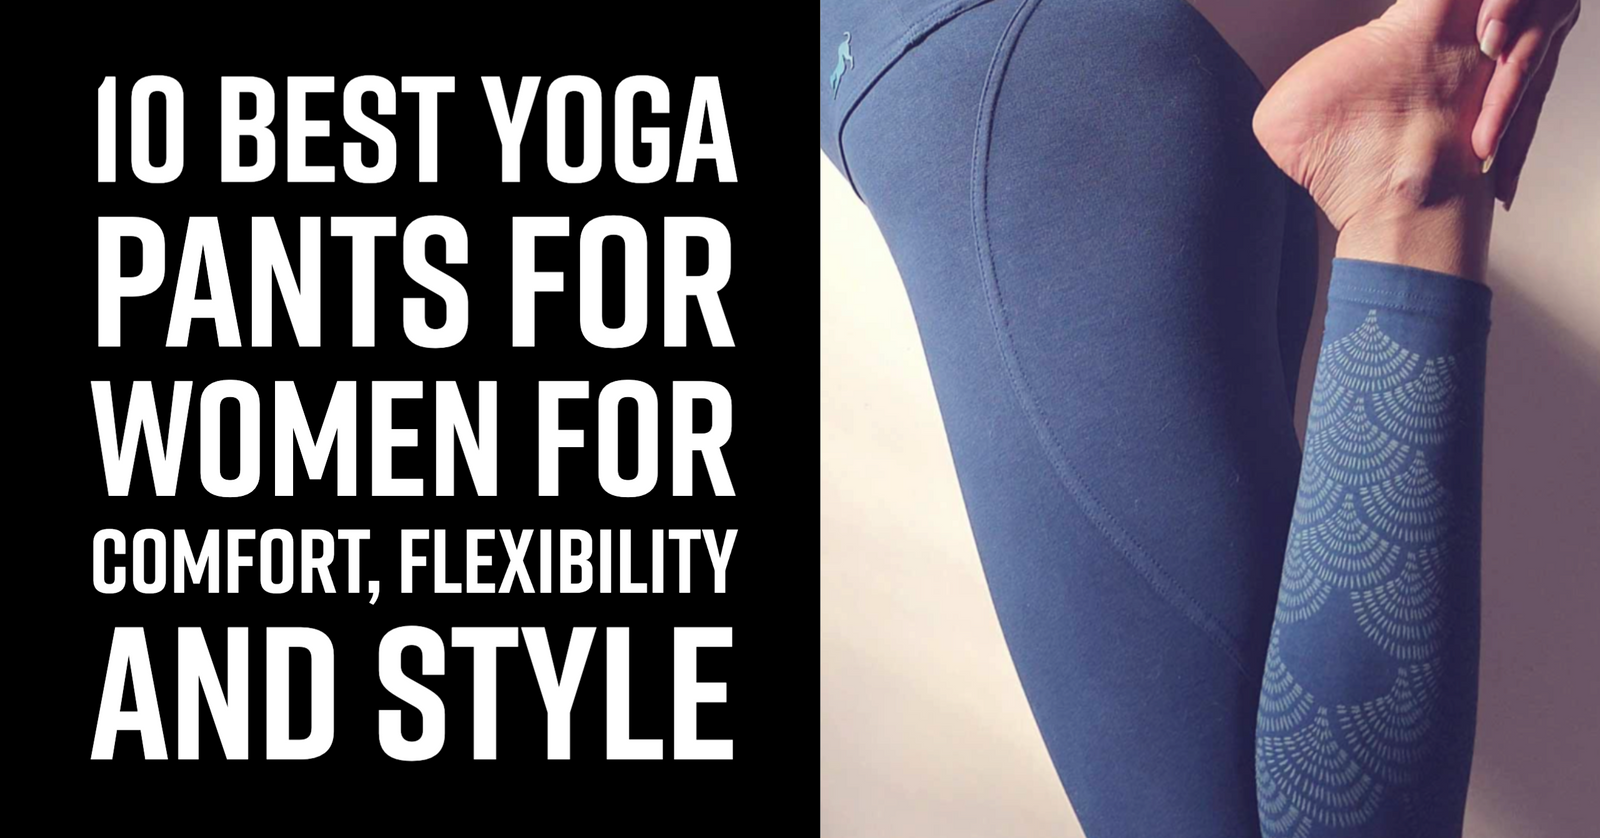 Leggings vs yoga pants—what is actually the difference?